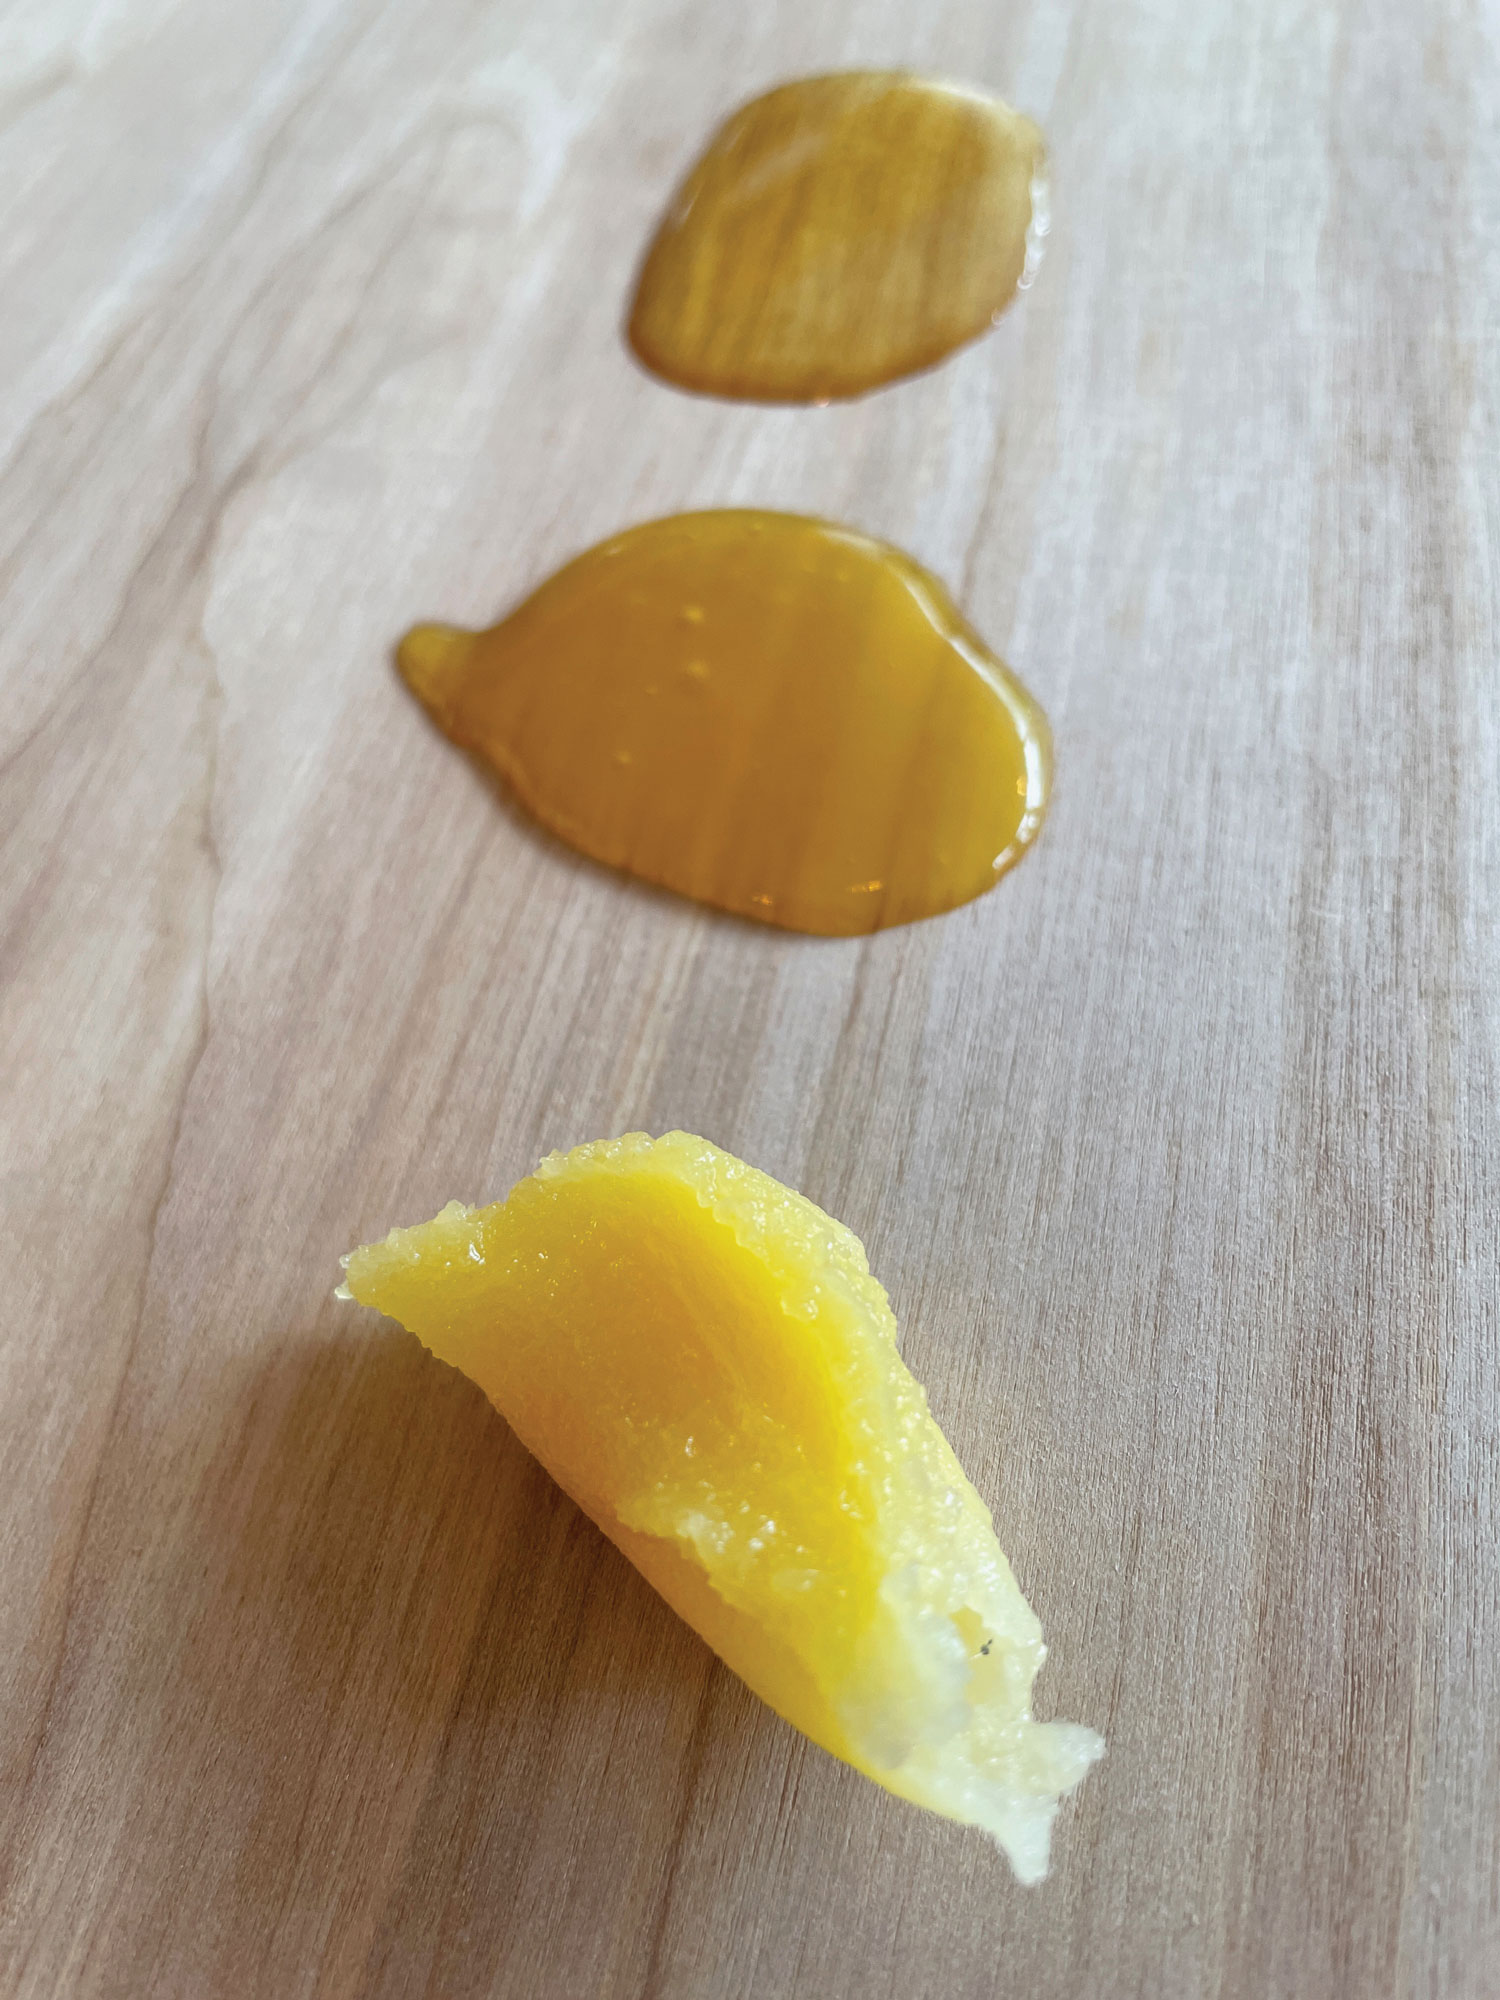 DIY] My first at-home skin experiment: making my own beeswax